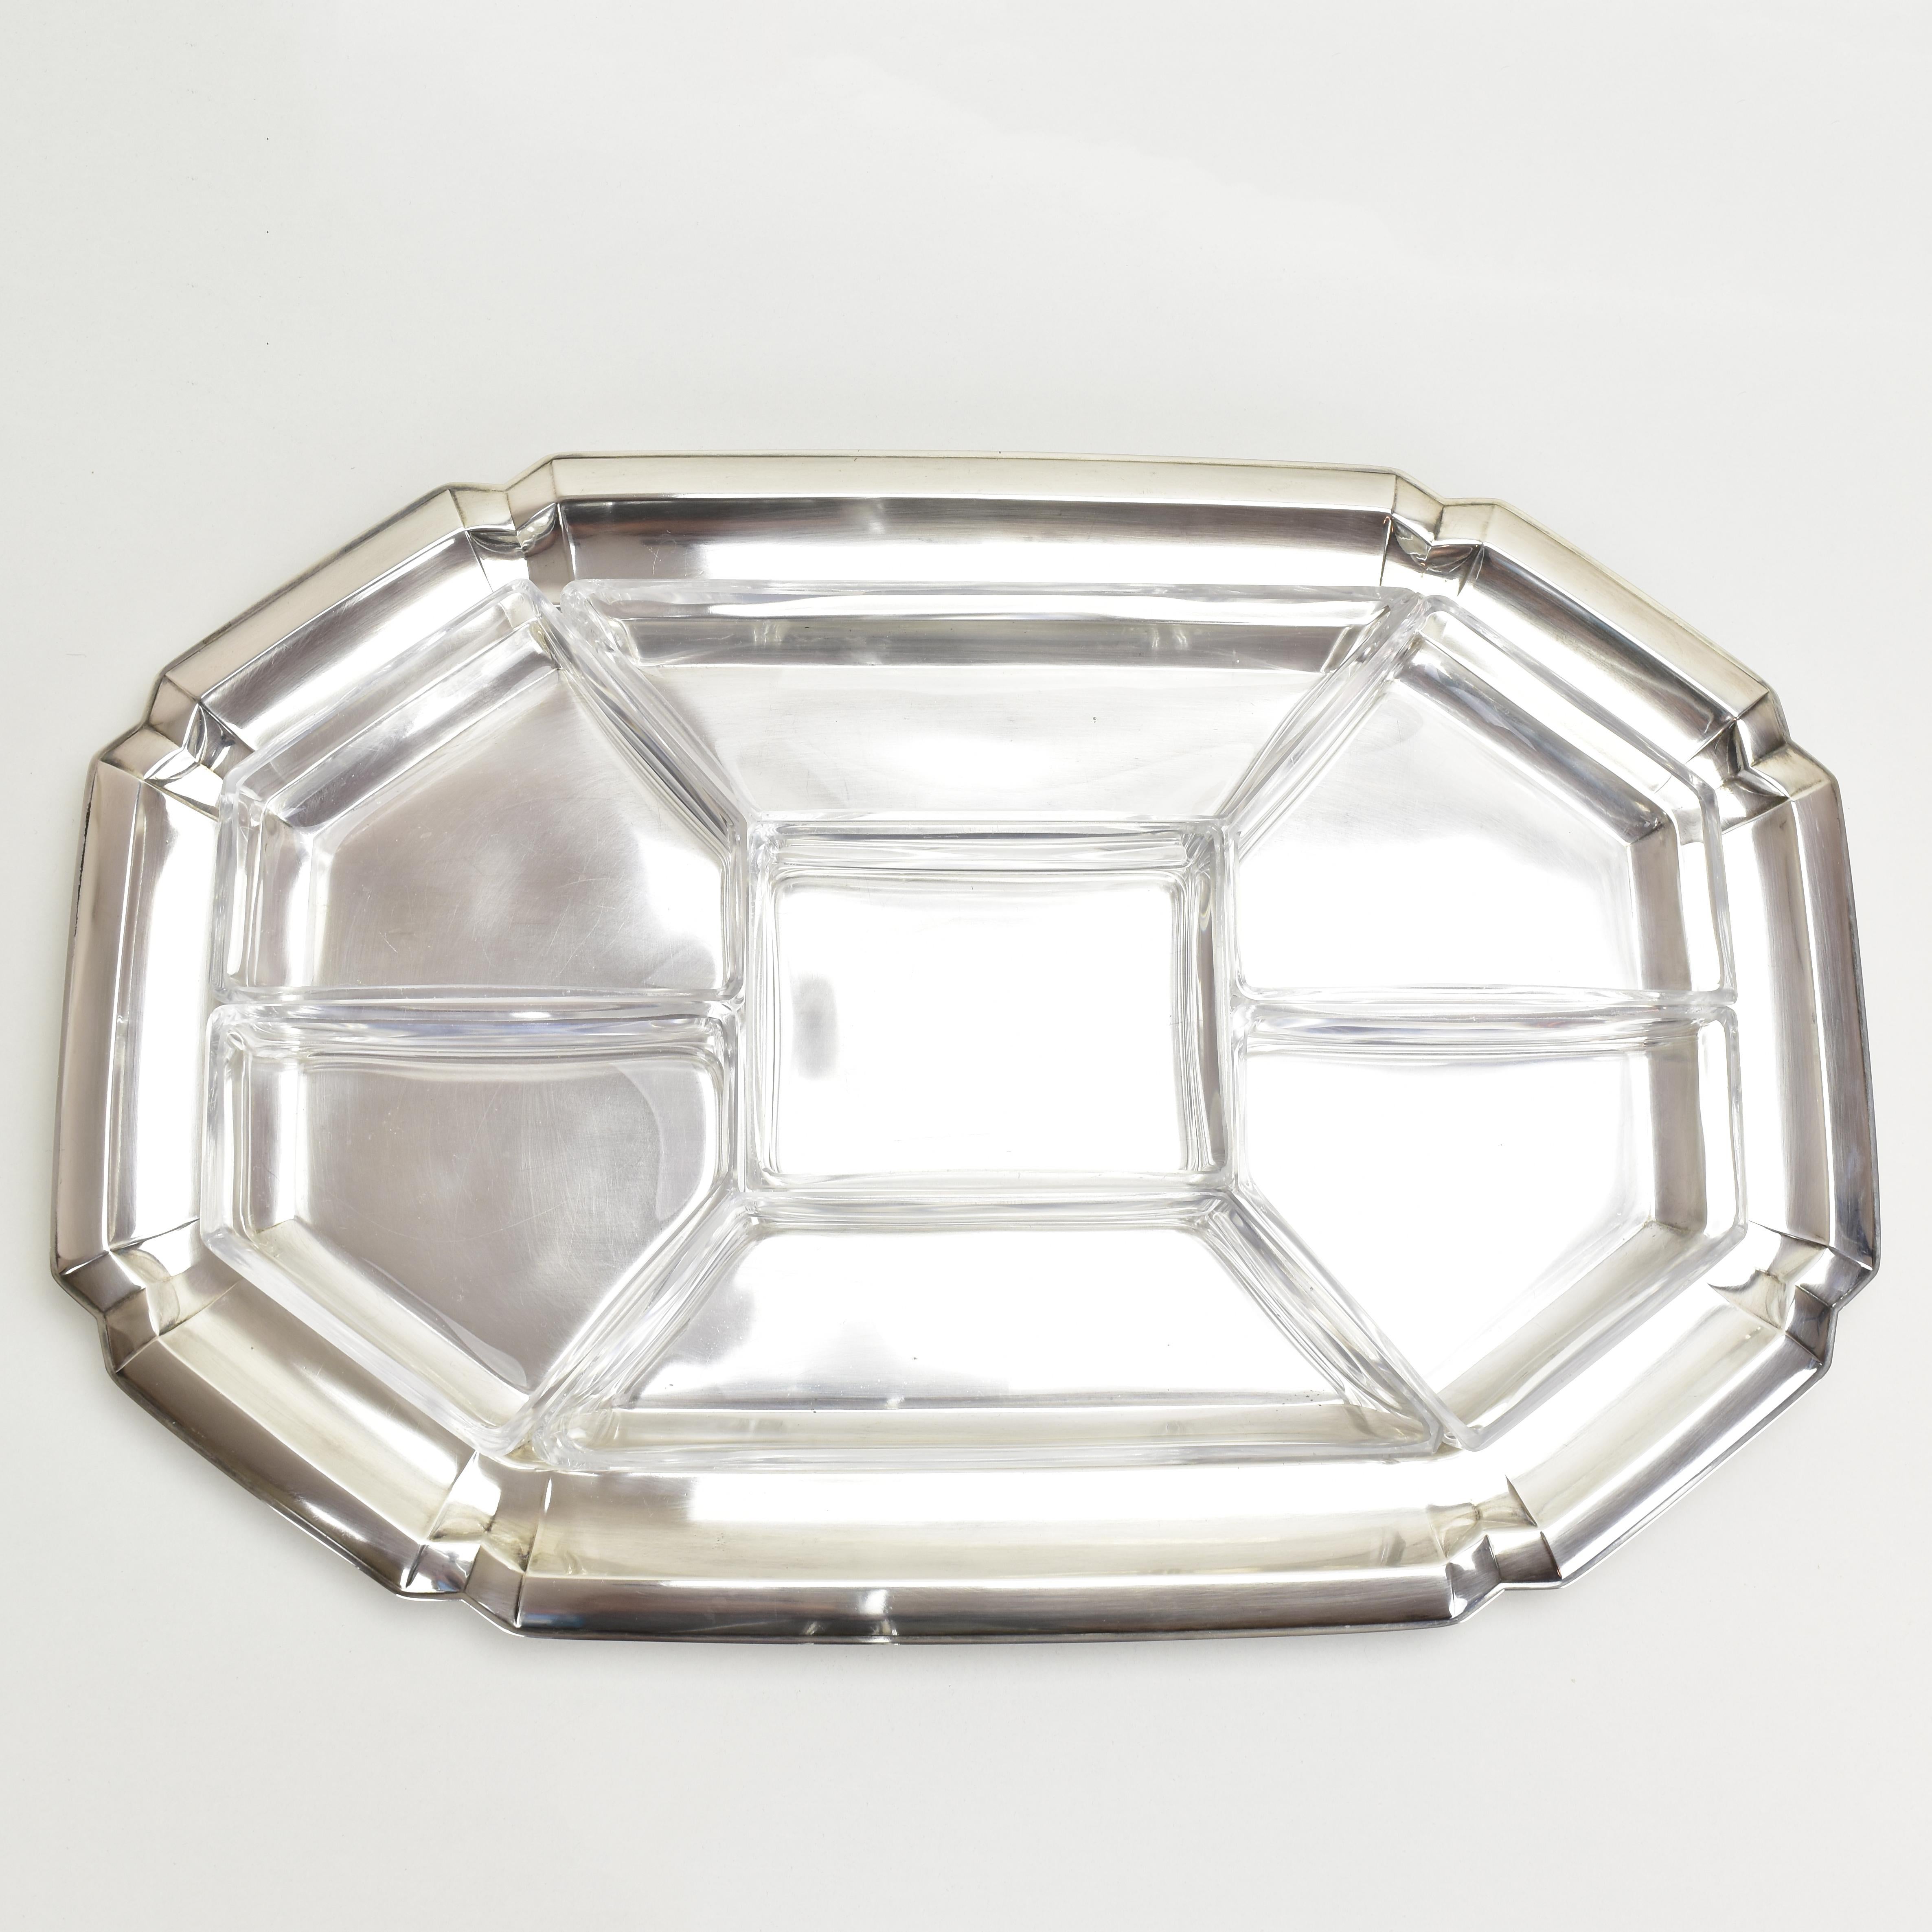 This stunning Art Deco snack tray is a beautiful addition to any cocktail party. The tray is made of silverplated brass and carries seven original cut crystal bowls.
The set is in very good condition with no dents or wear to the silvering, only two